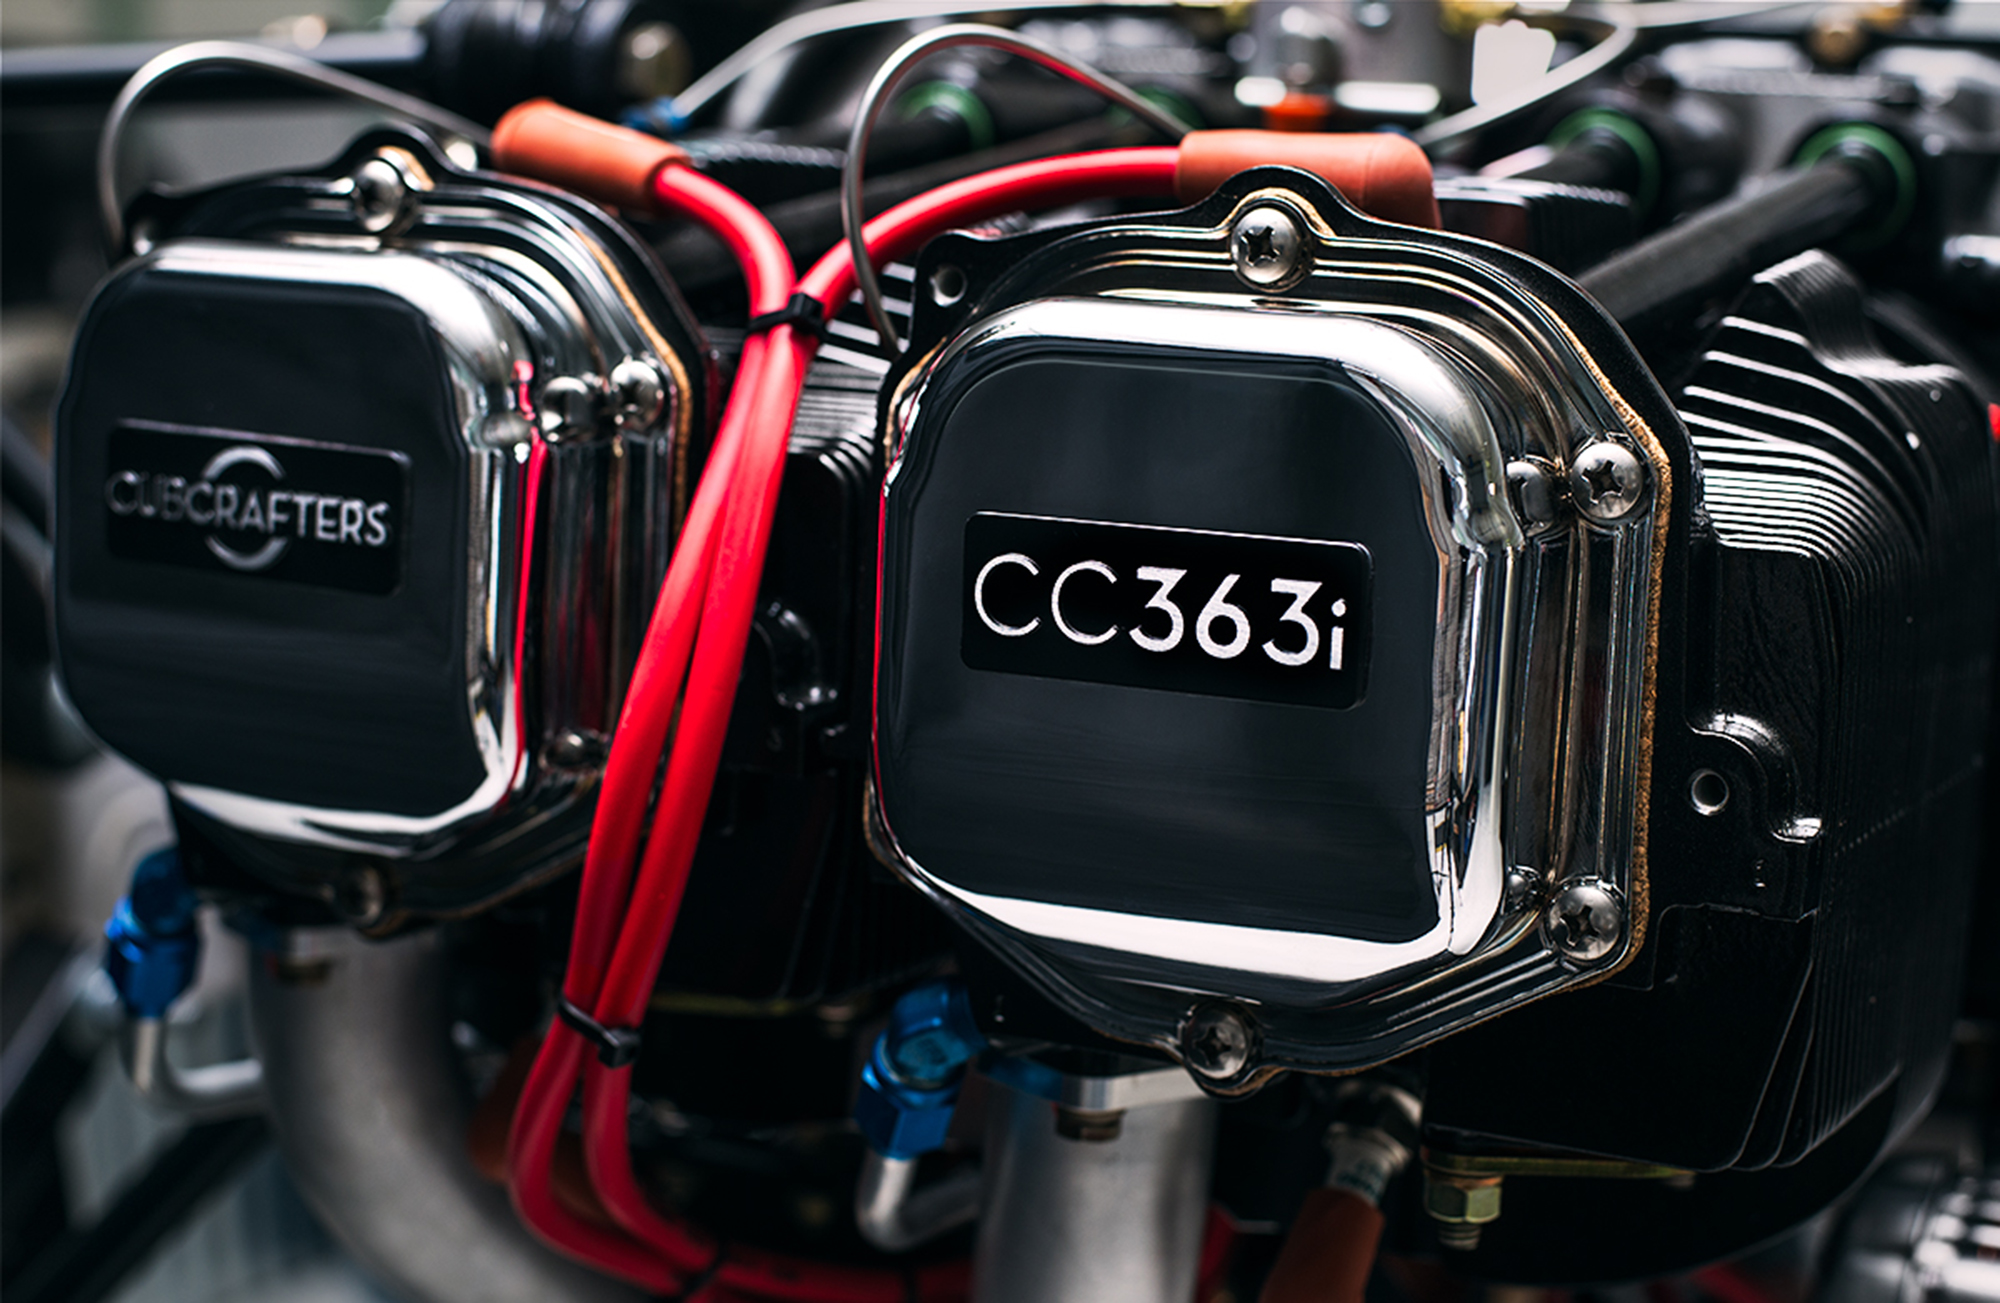 CubCrafters will equip two new versions of the Carbon Cub with the Superior Air Parts and Aero Sport Power CC363i power plant. Photo courtesy of CubCrafters.